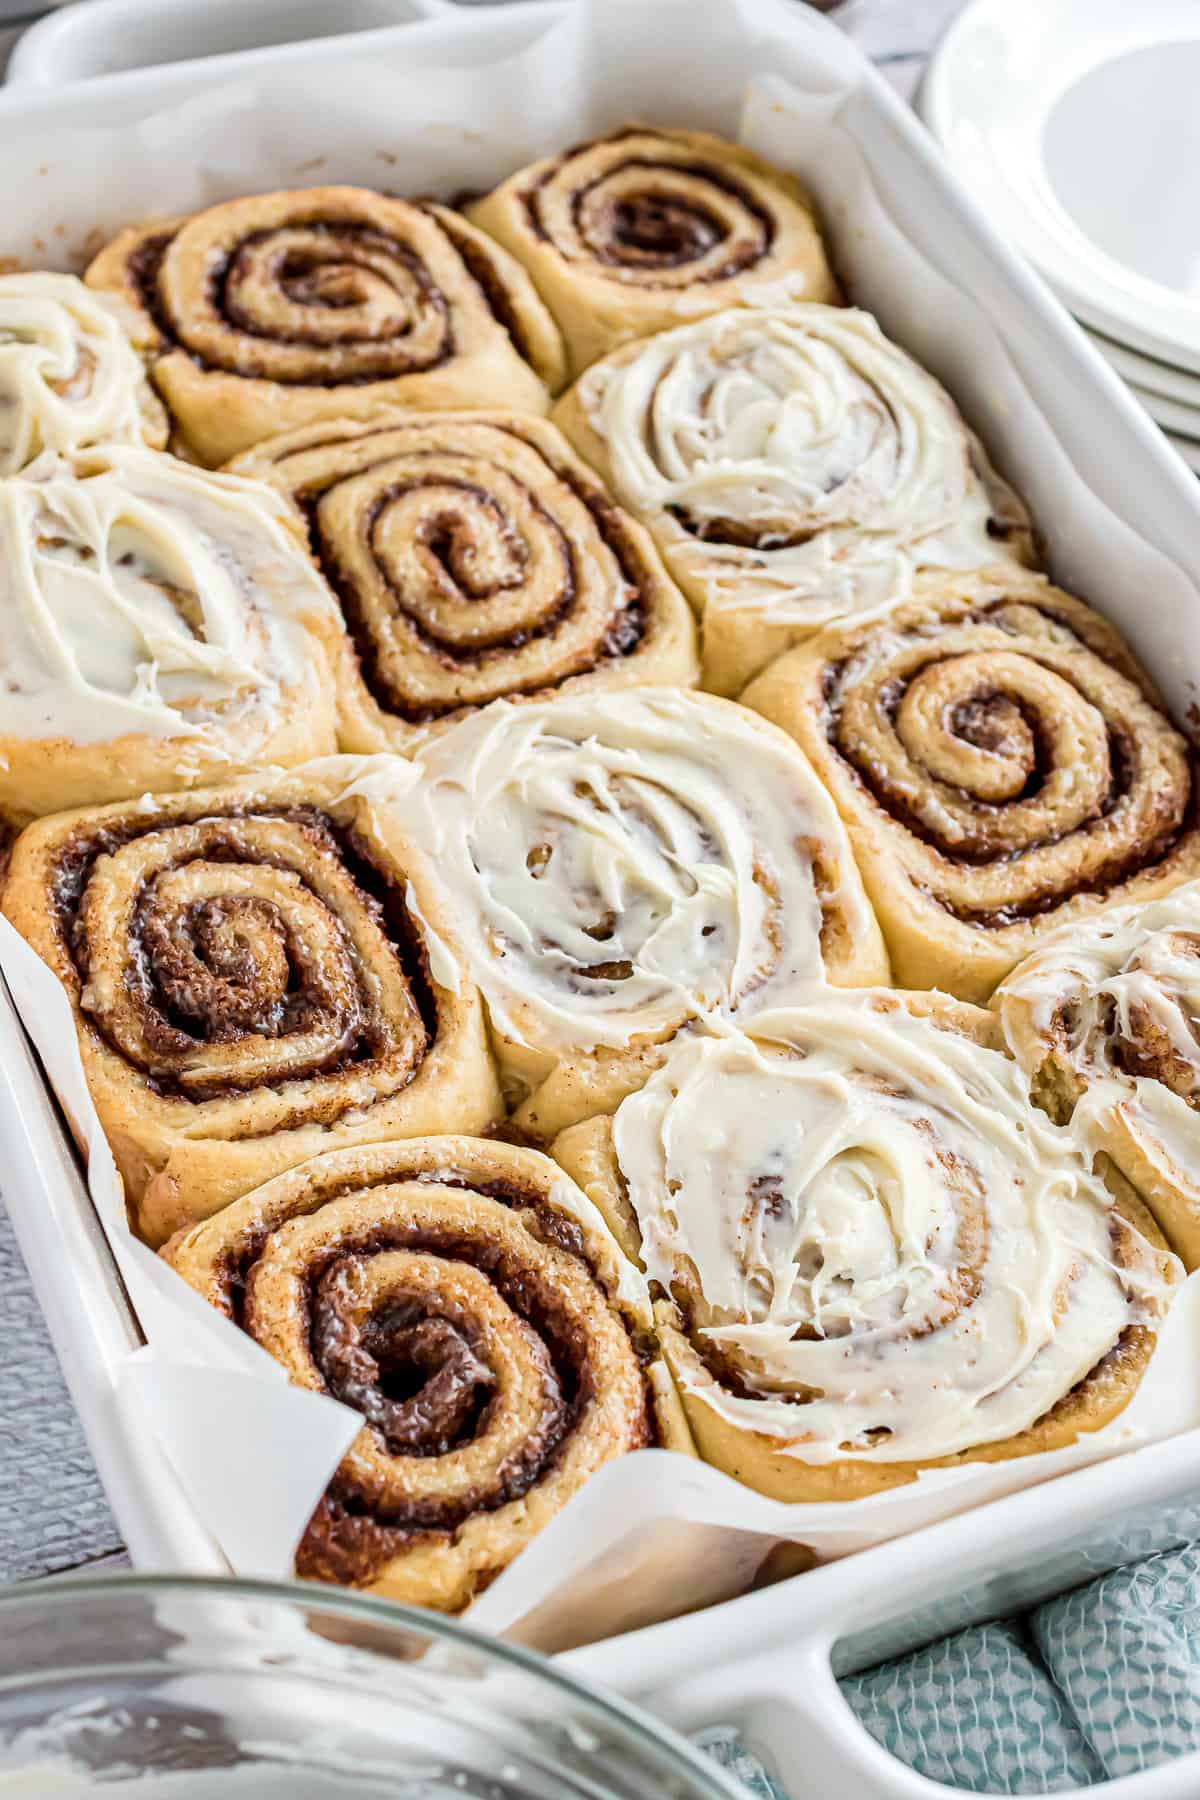 Pan of cinnamon rolls with some frosting